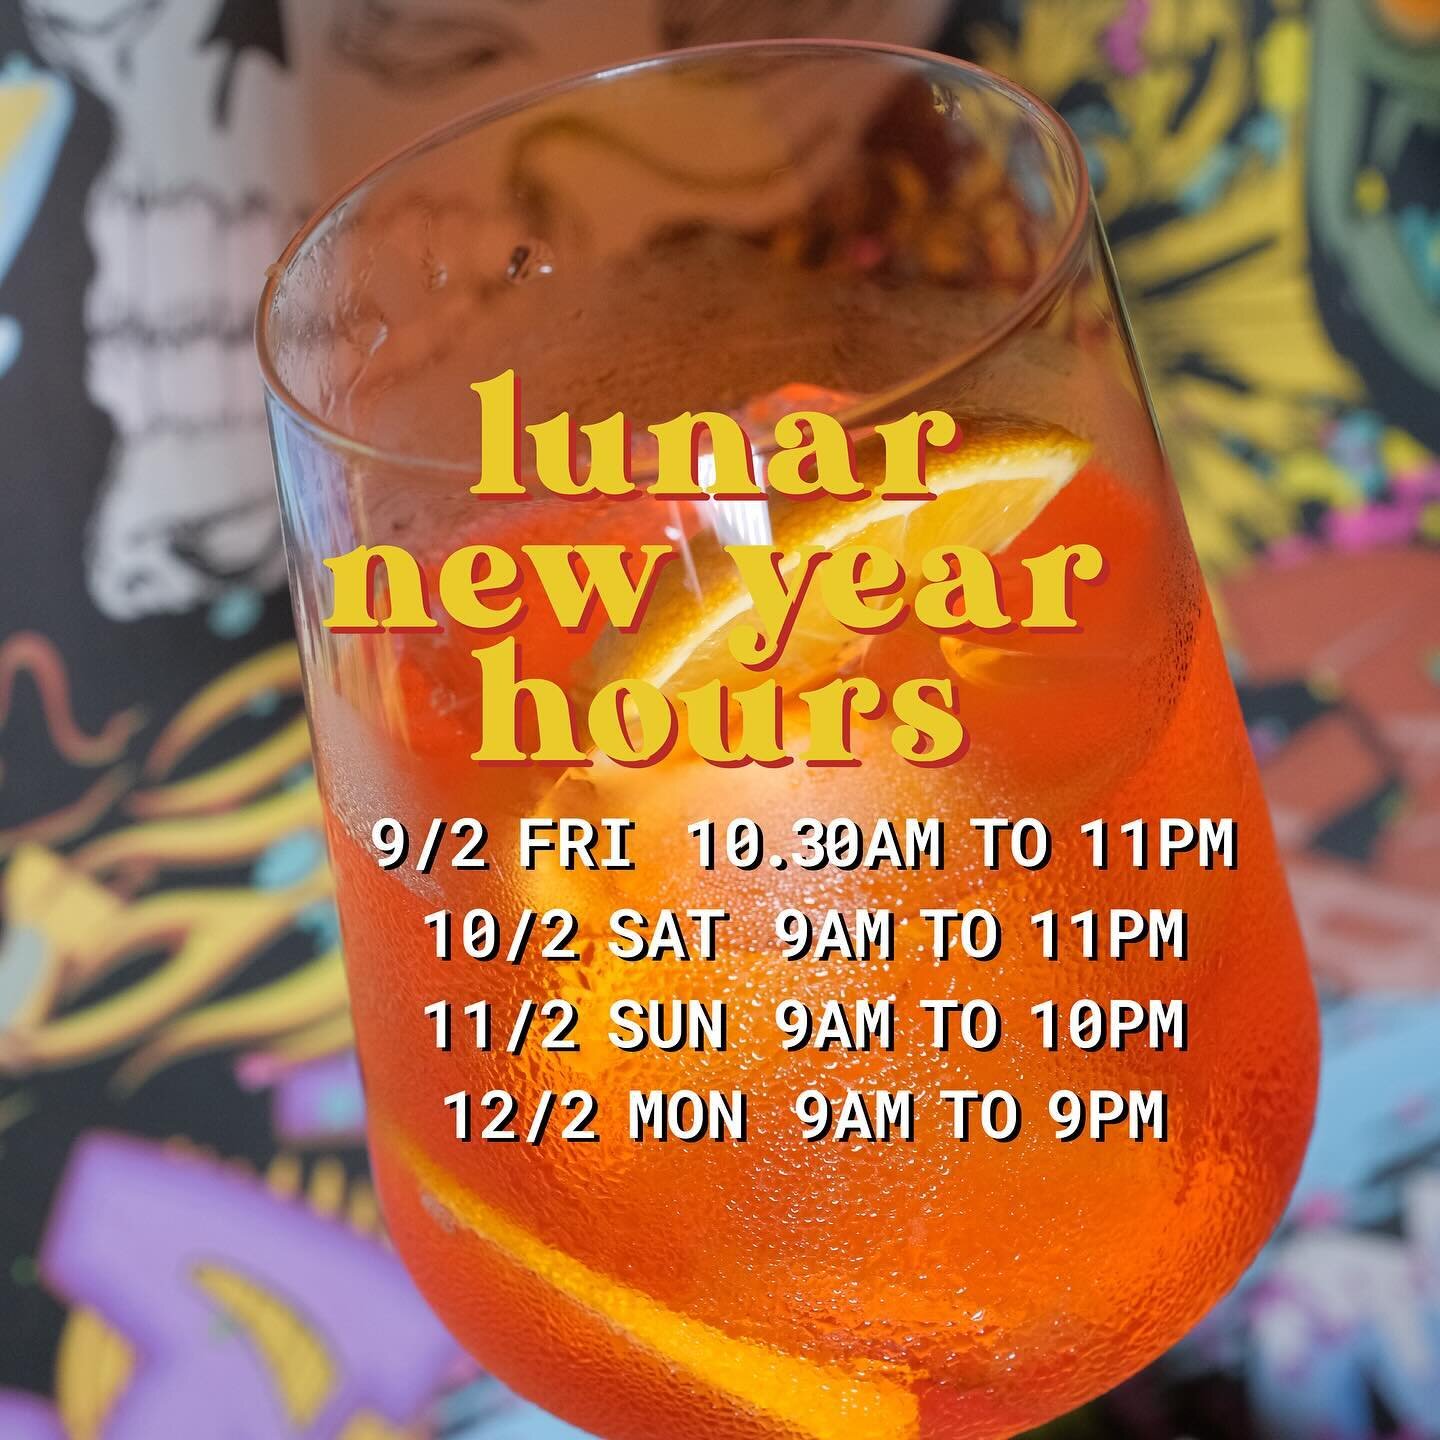 BREAKFAST. LUNCH. BRUNCH. DINNER.

We will be open everyday throughout the Lunar New Year 🍊🍊🧧🧨🀄️🐉